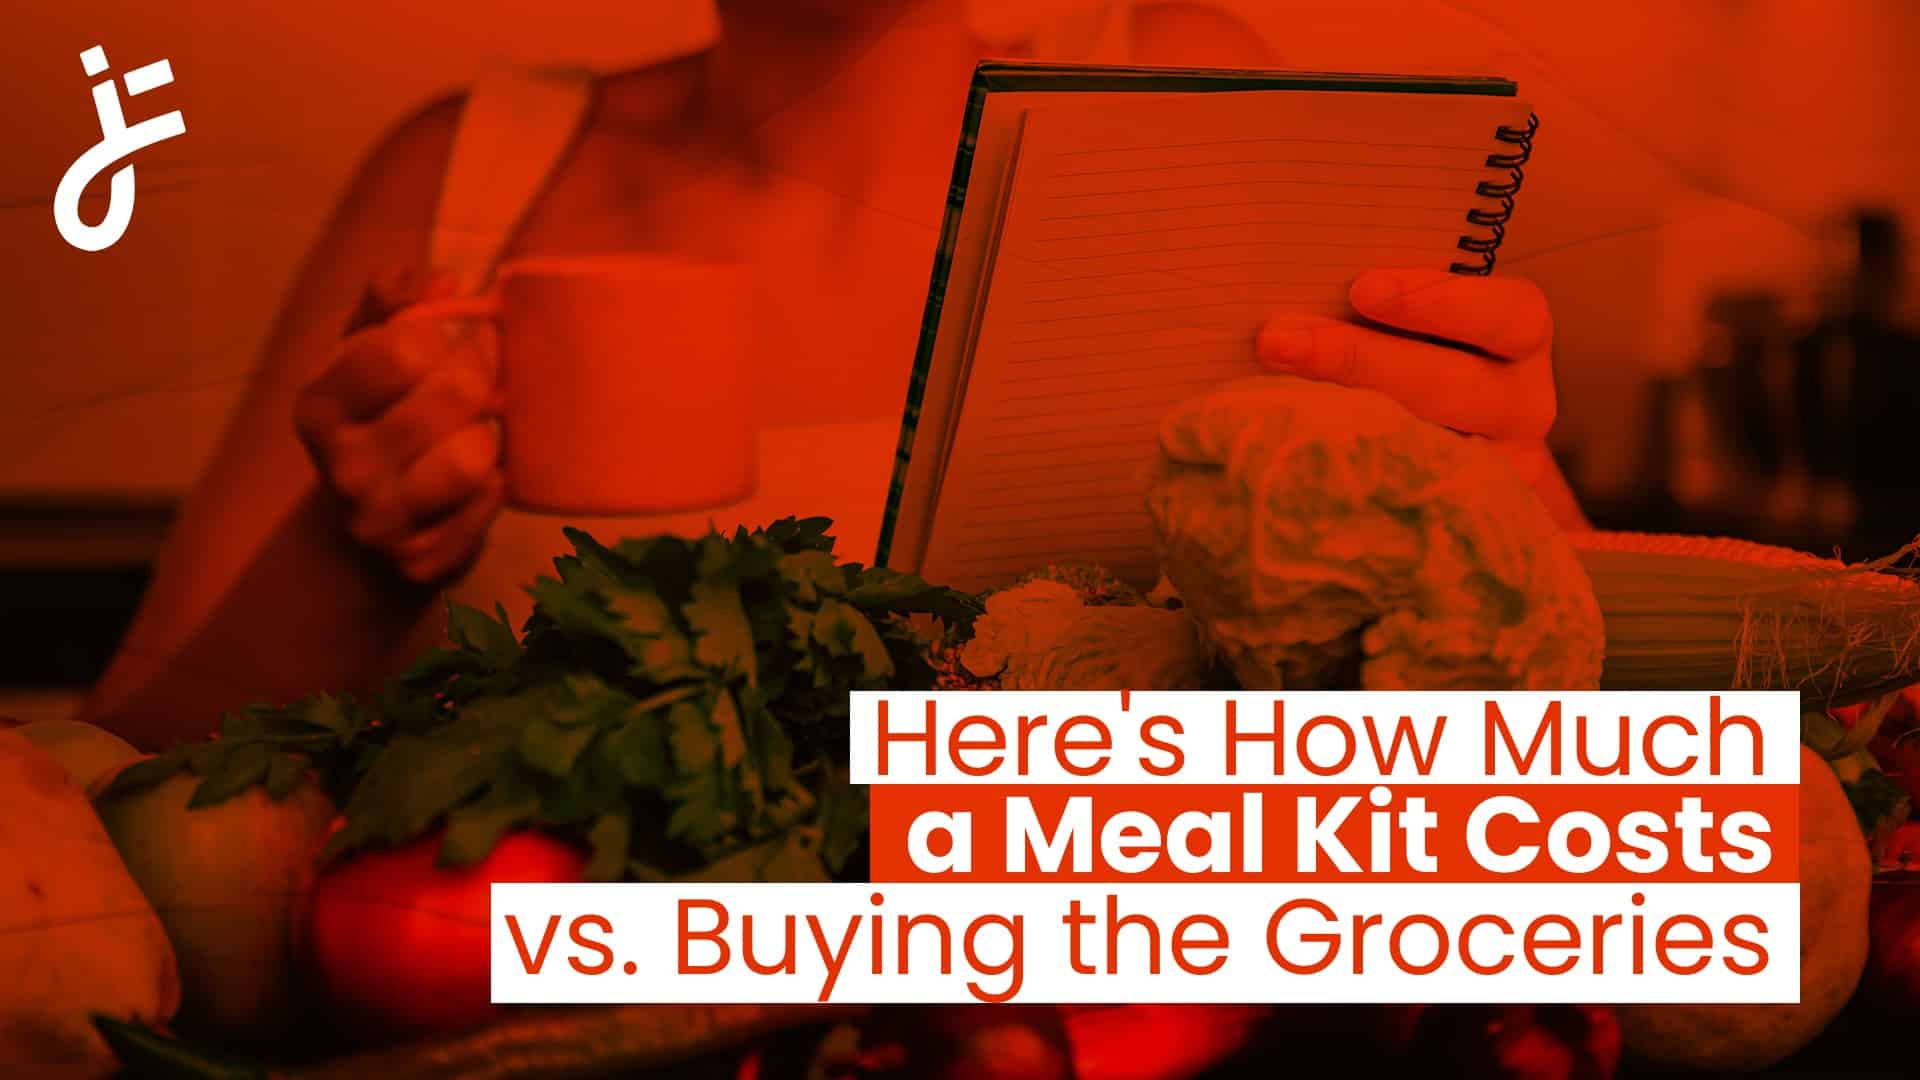 a Meal Kit Costs vs Buying the Groceries